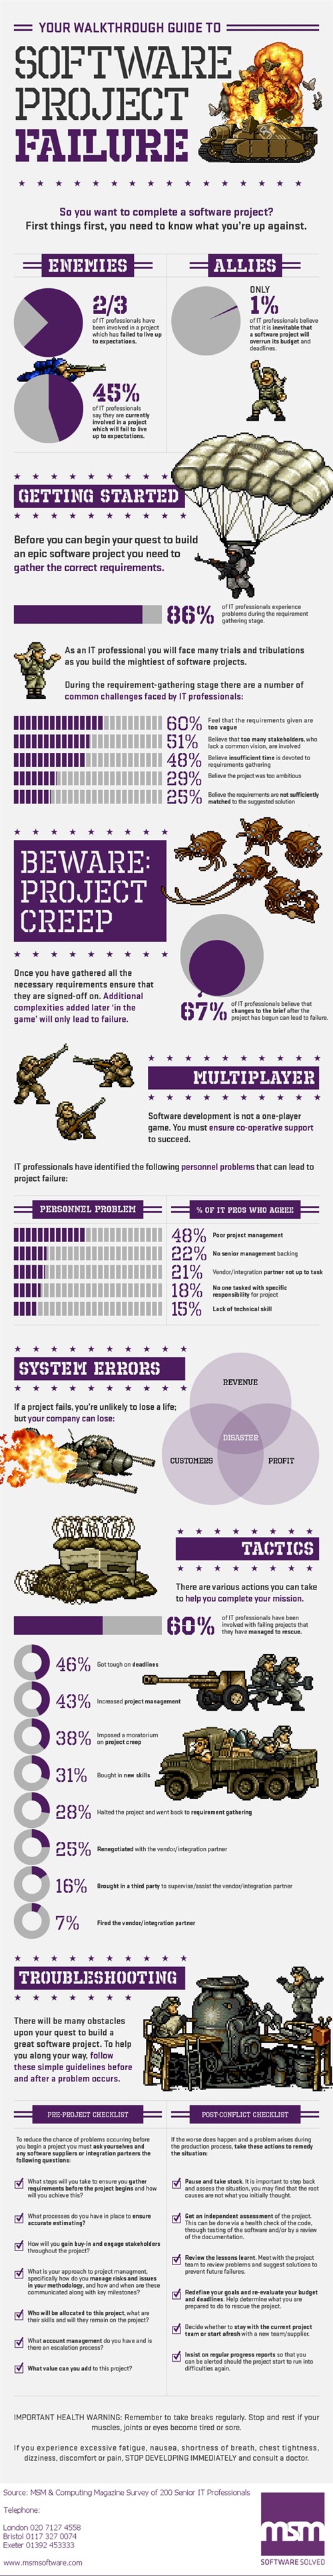 software-project-failure-infographic2_500x3870.jpg